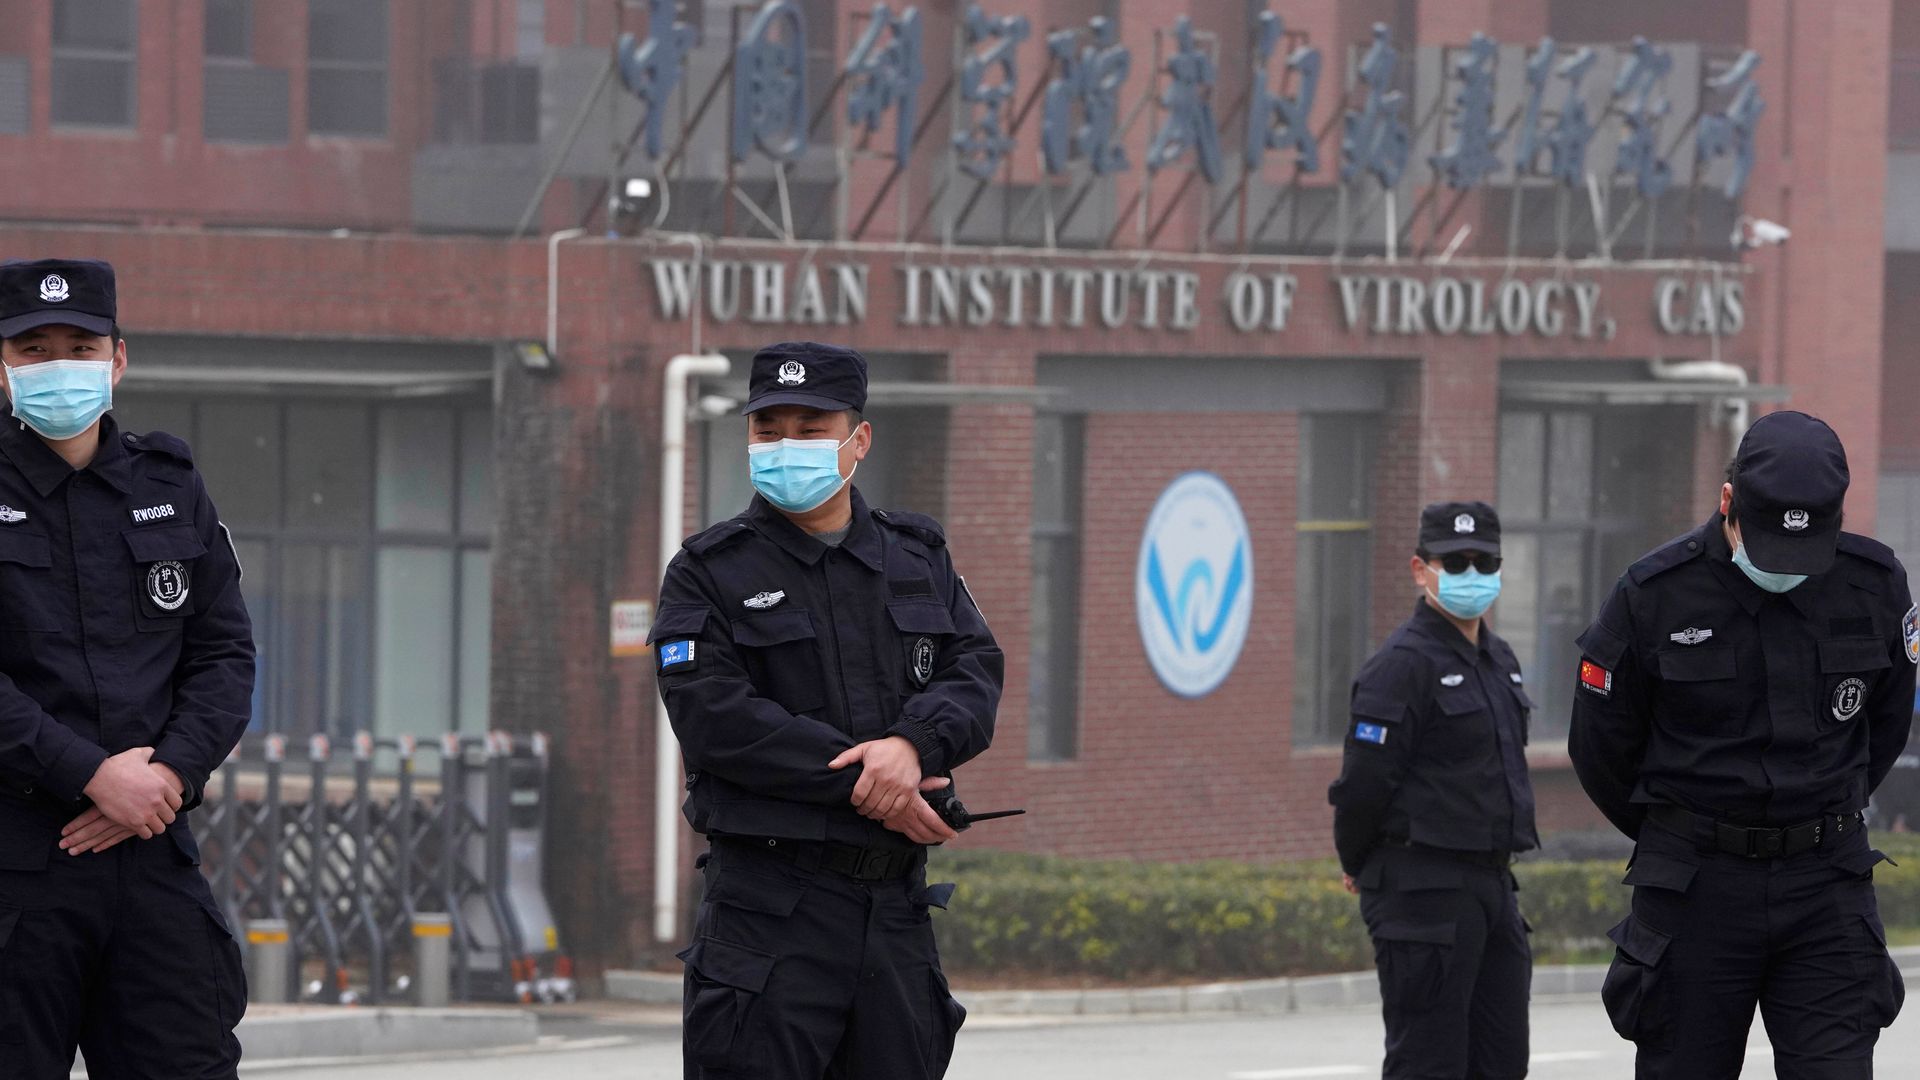 The U.S. government has cut future funding for the Wuhan Institute of Virology after it failed to provide safety and security documents.